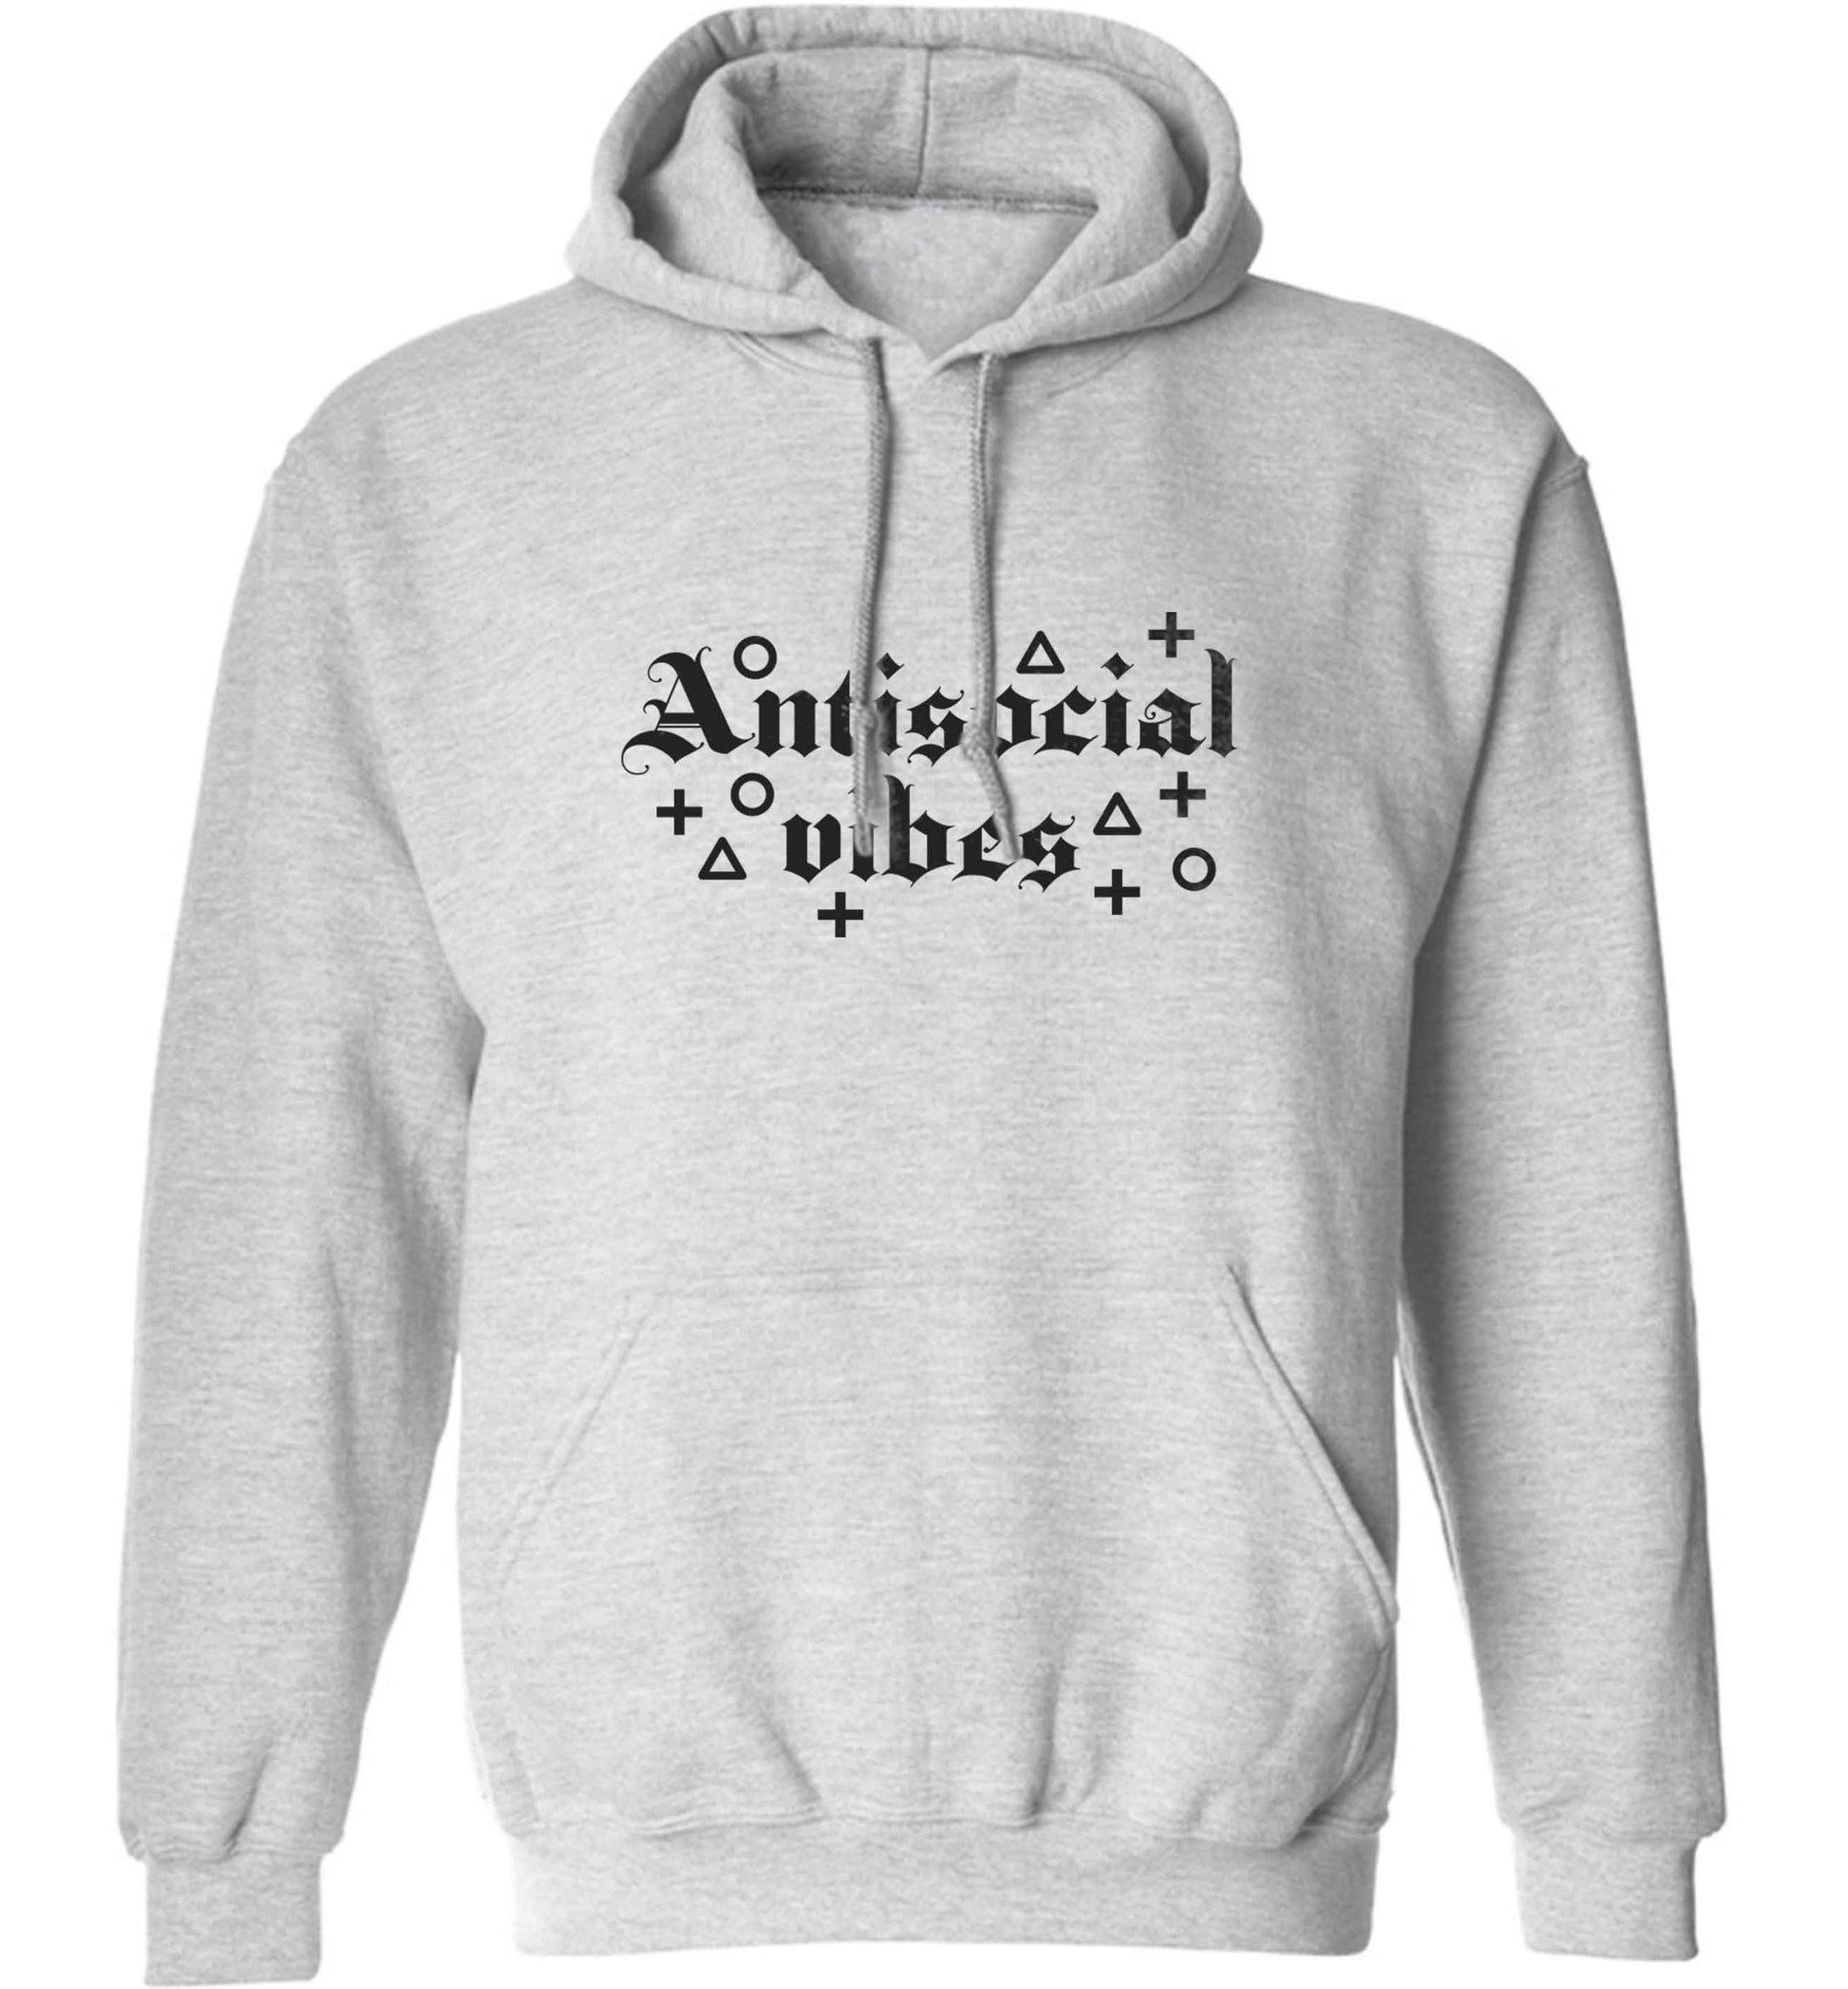 Antisocial vibes adults unisex grey hoodie 2XL